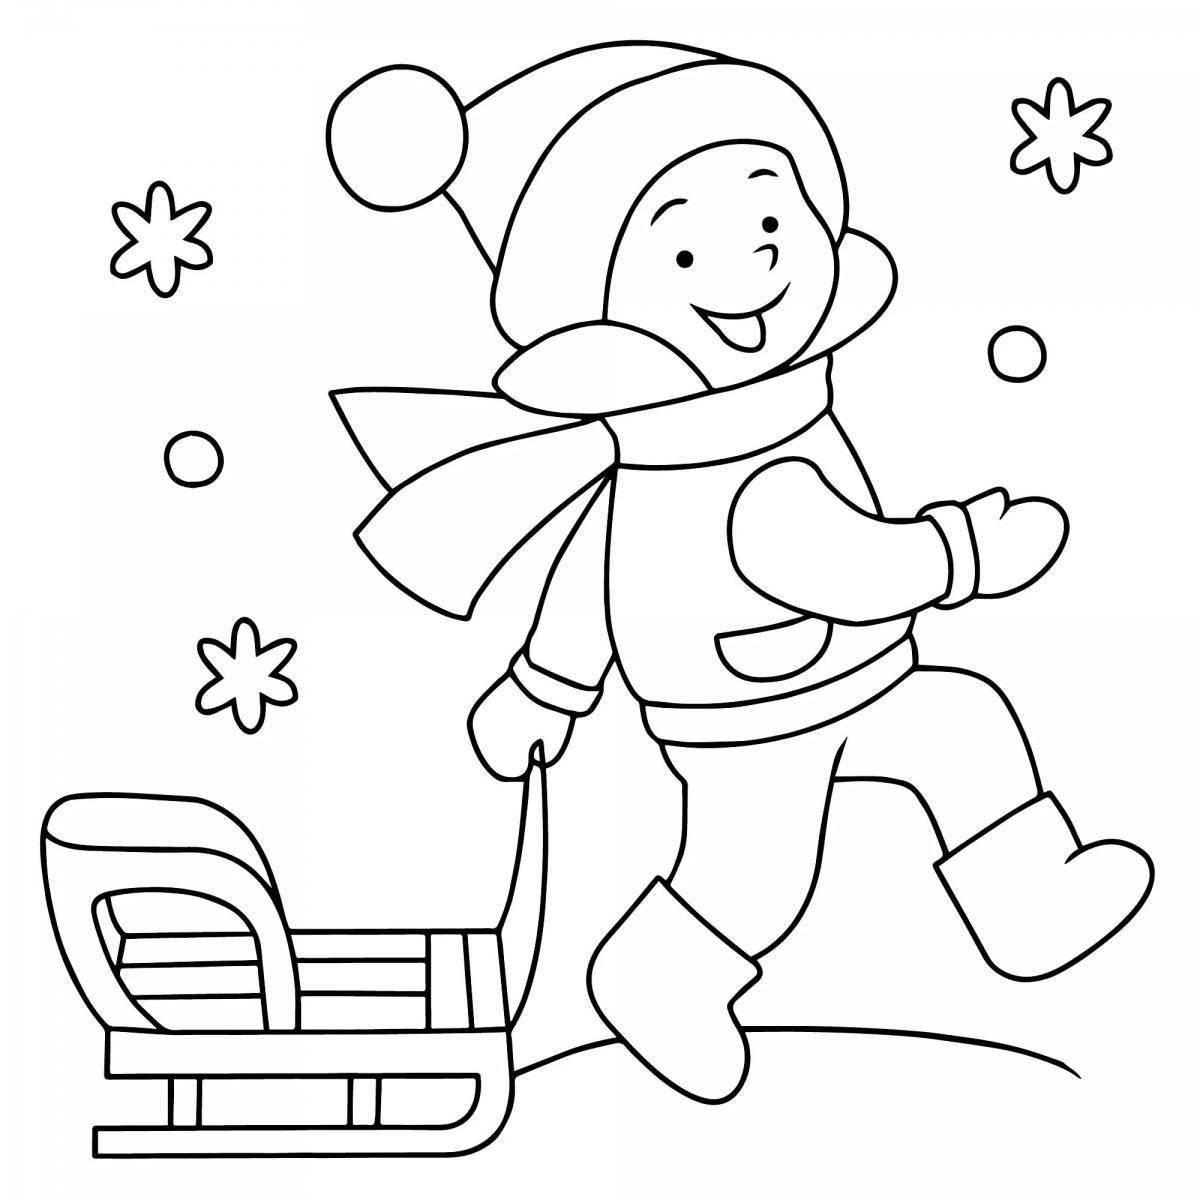 Adorable winter coloring book for 3-4 year olds